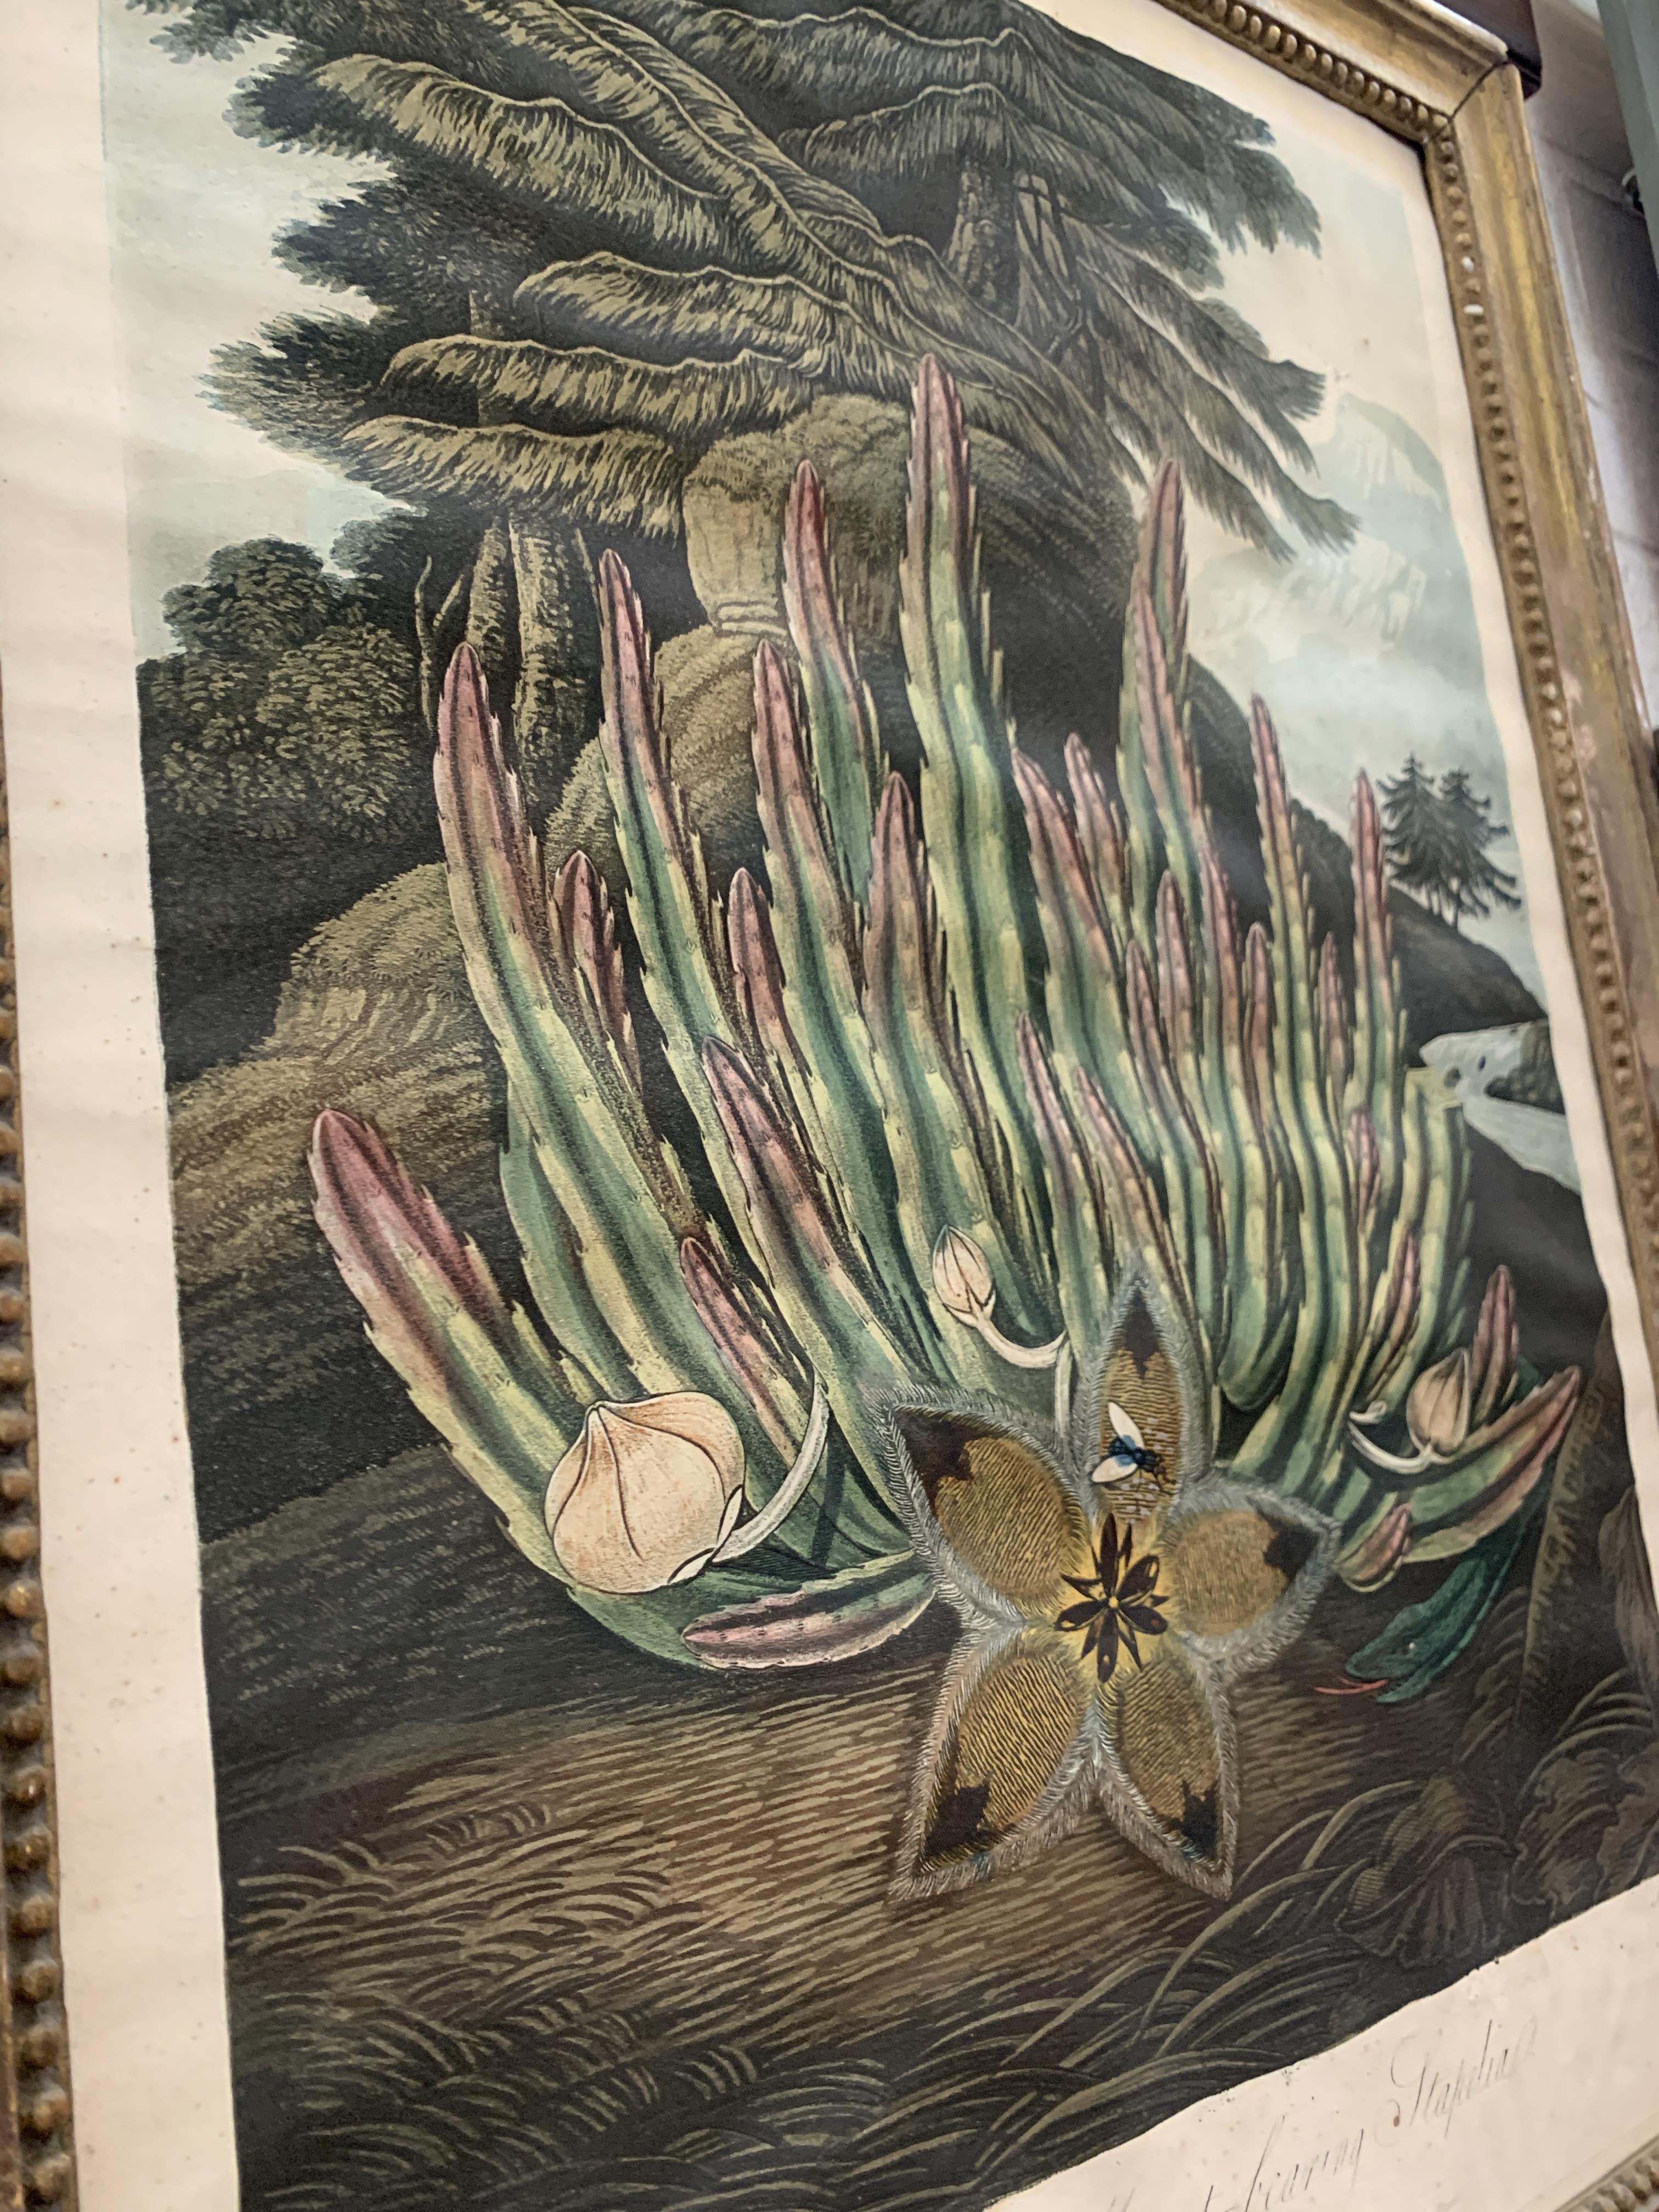 Stadler after Henderson, 'The Maggot-bearing Stapelia' published by Dr. Thonton, 1801; 52.5x39cm - Image 3 of 4